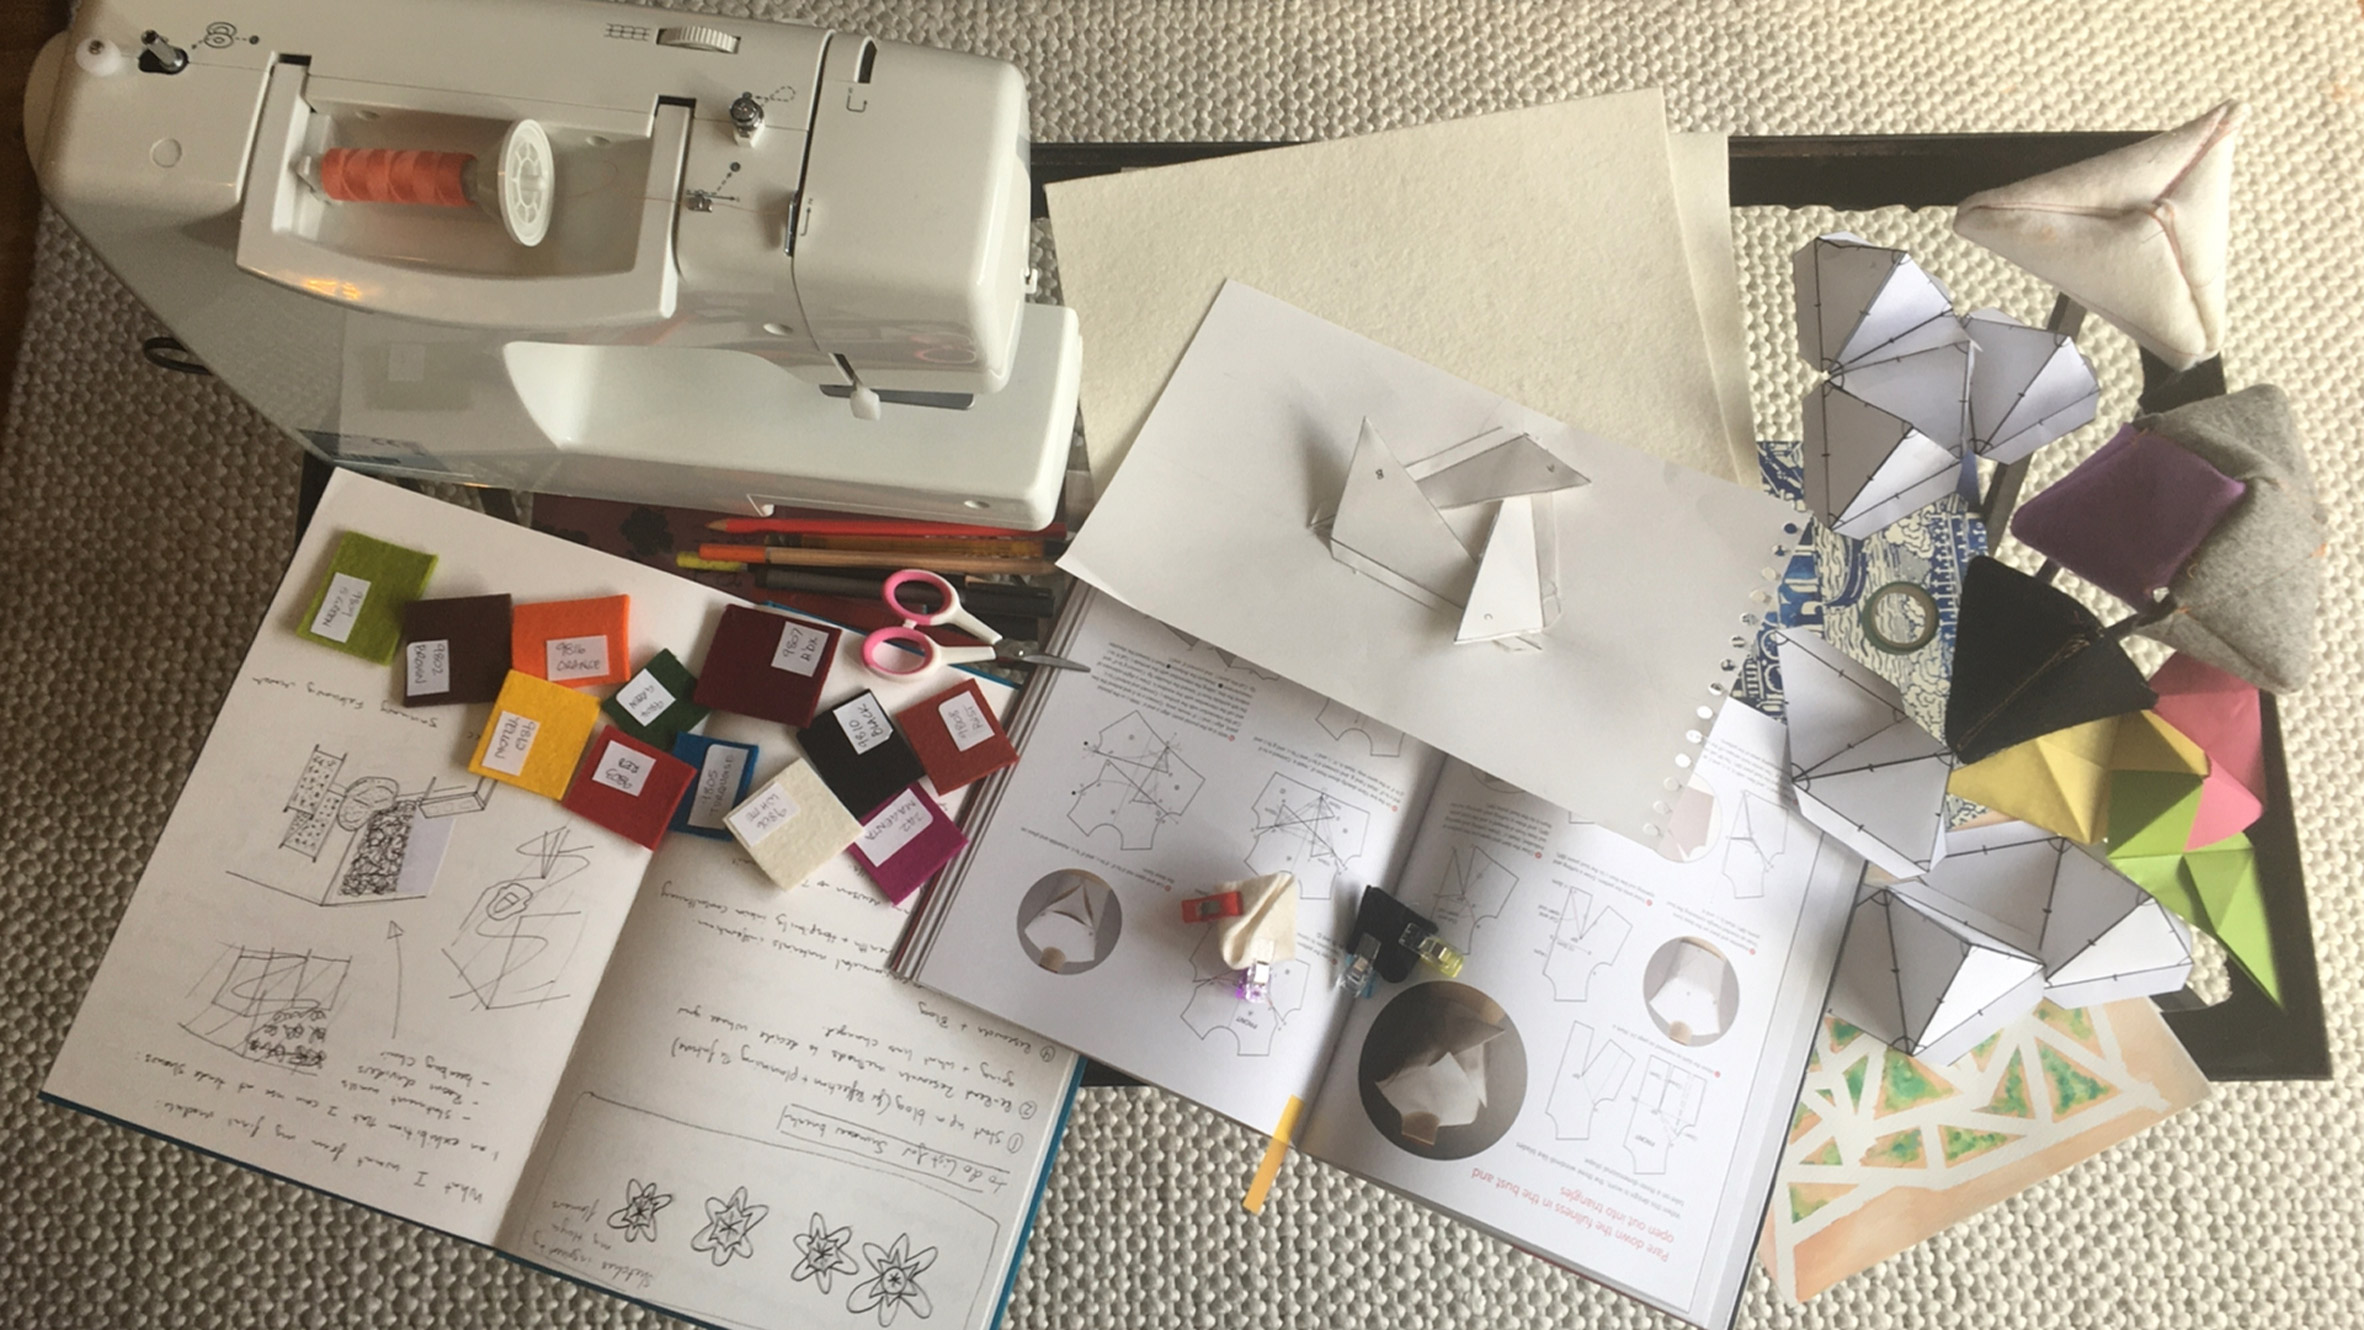 Sewing machine on coffee table